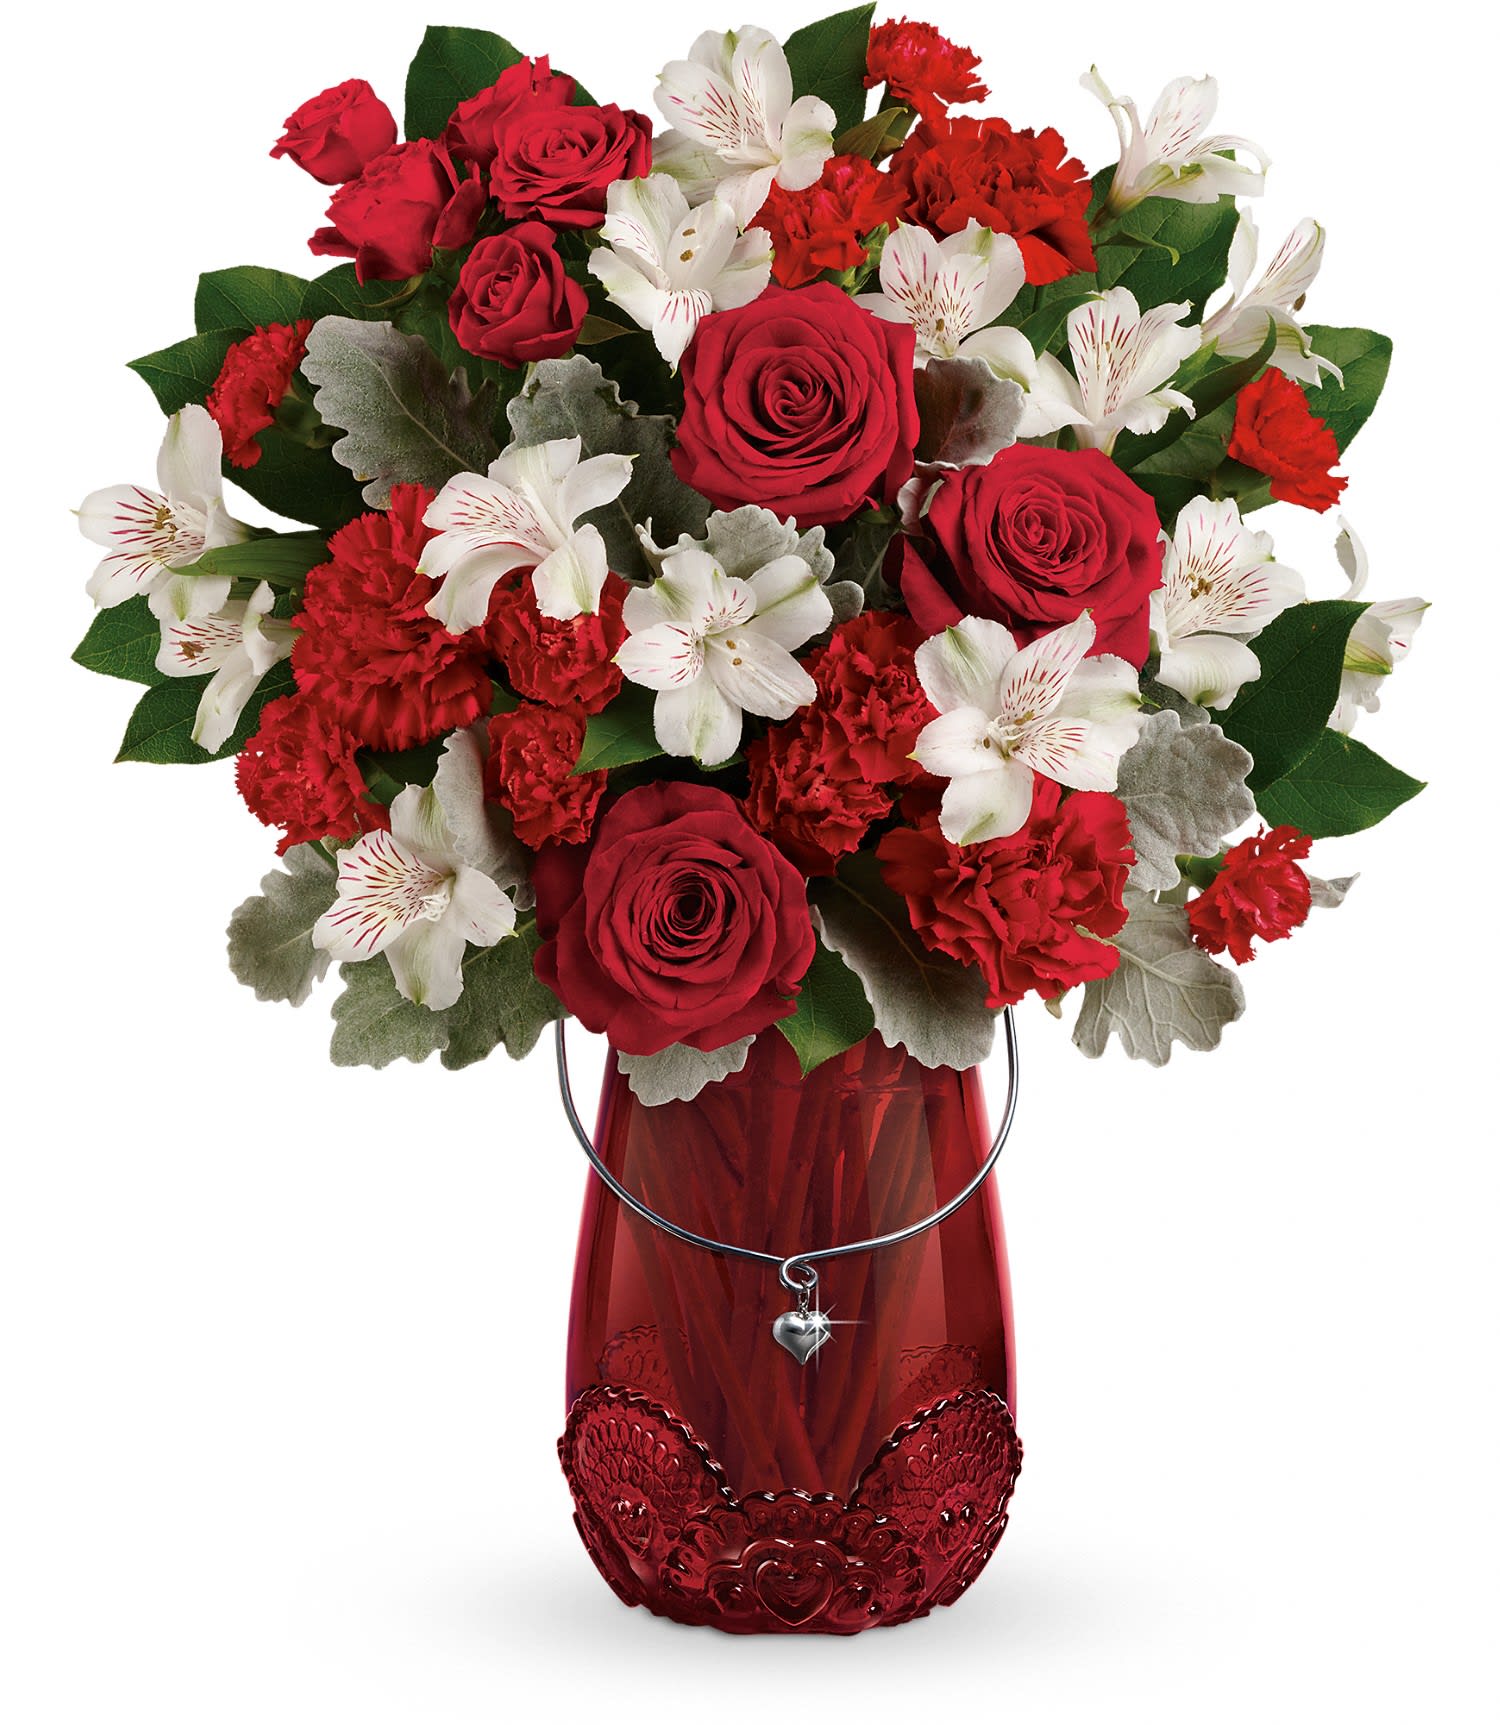 Teleflora's Red Haute Bouquet - Take their Valentine's Day breath away with this passionate rose bouquet, presented in a keepsake glass lantern vase with beautiful lace detail and sparkling heart charm. 